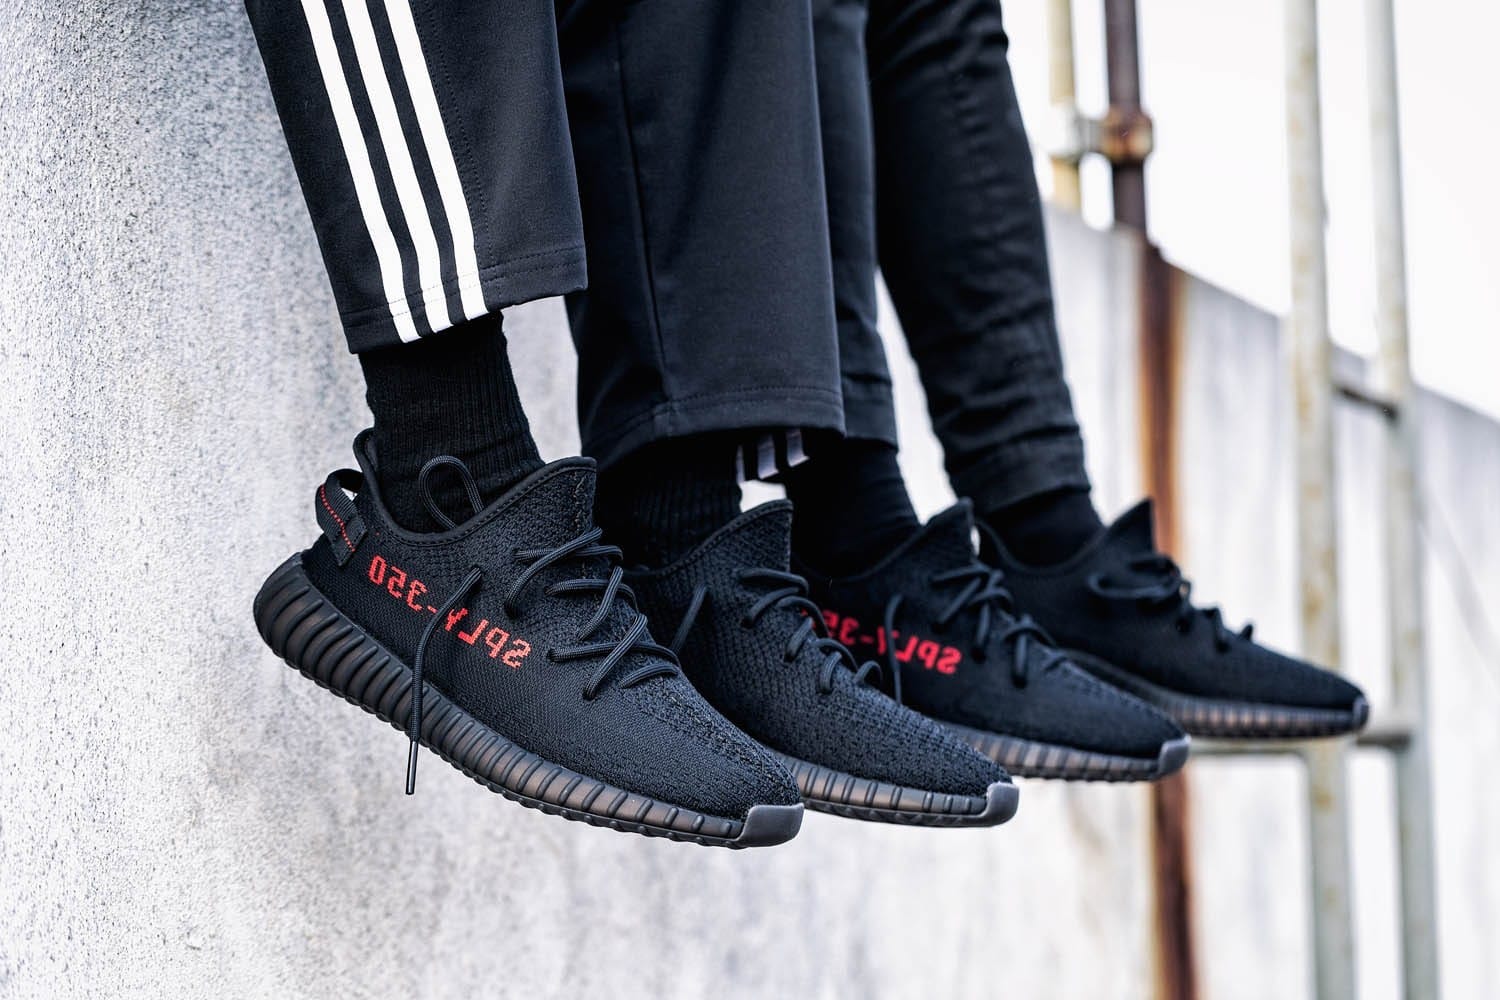 yeezy black and red sply 350